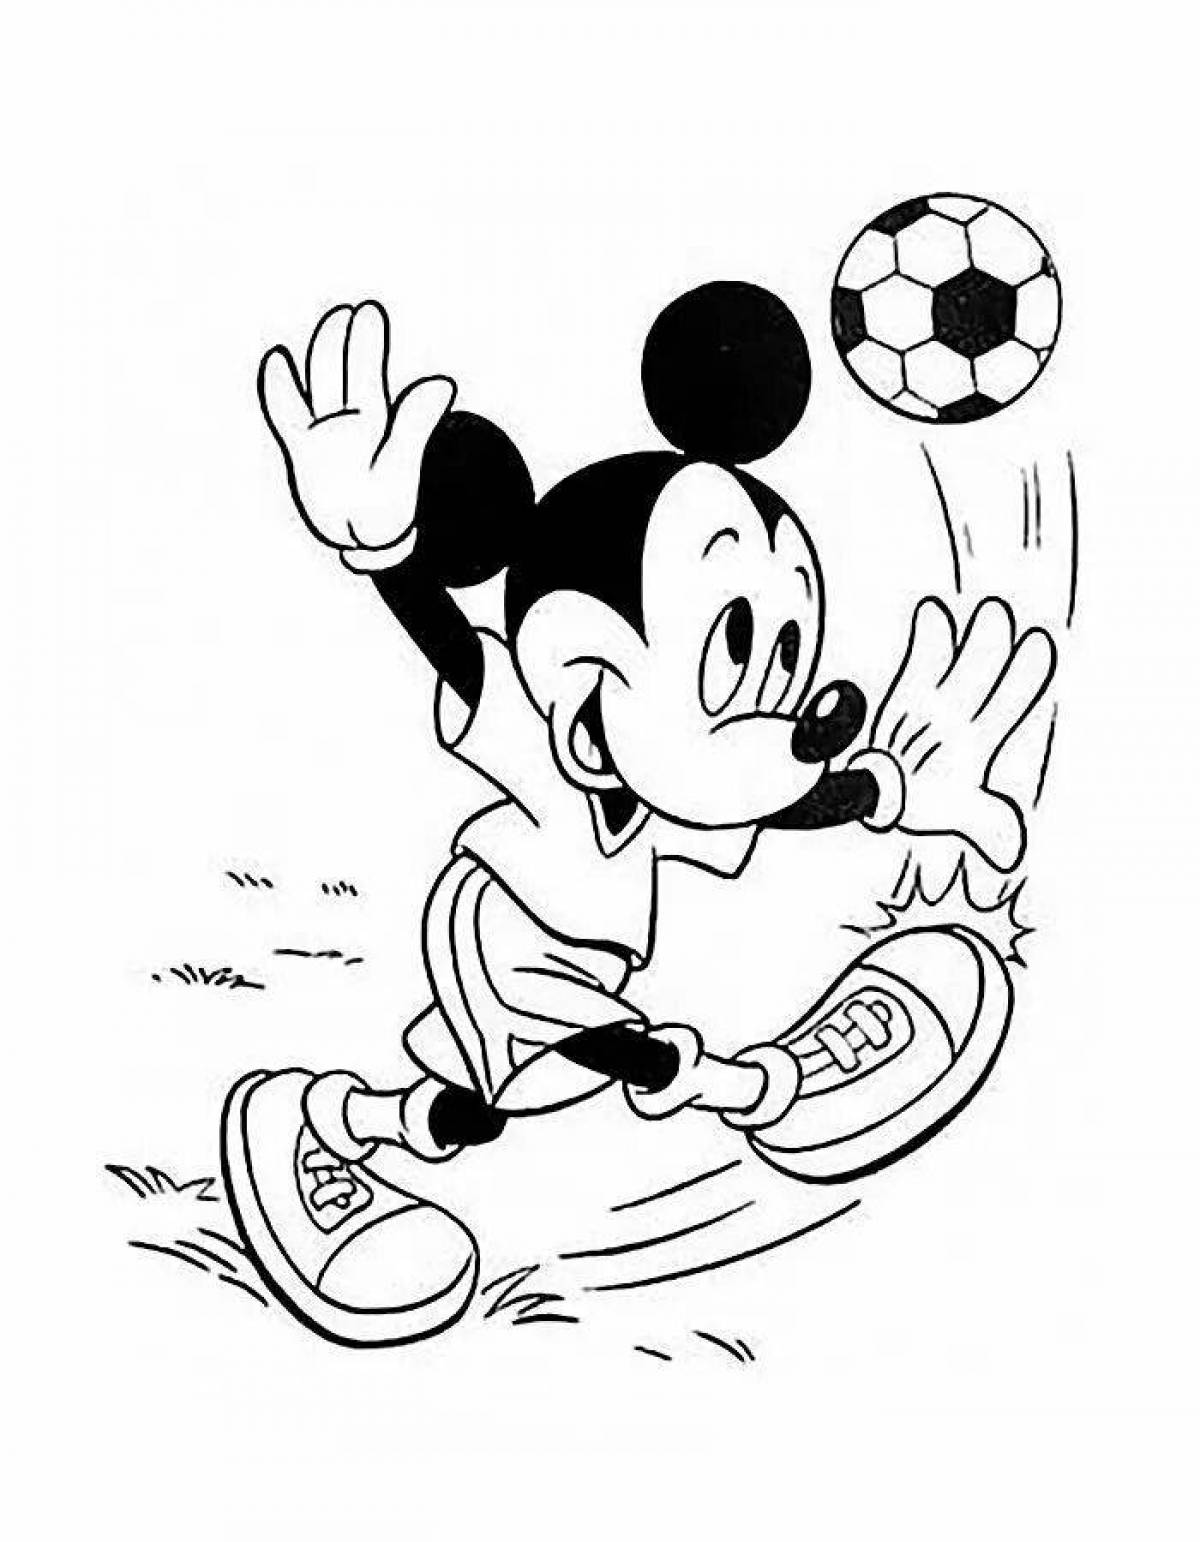 Animated mickey mouse coloring book for kids